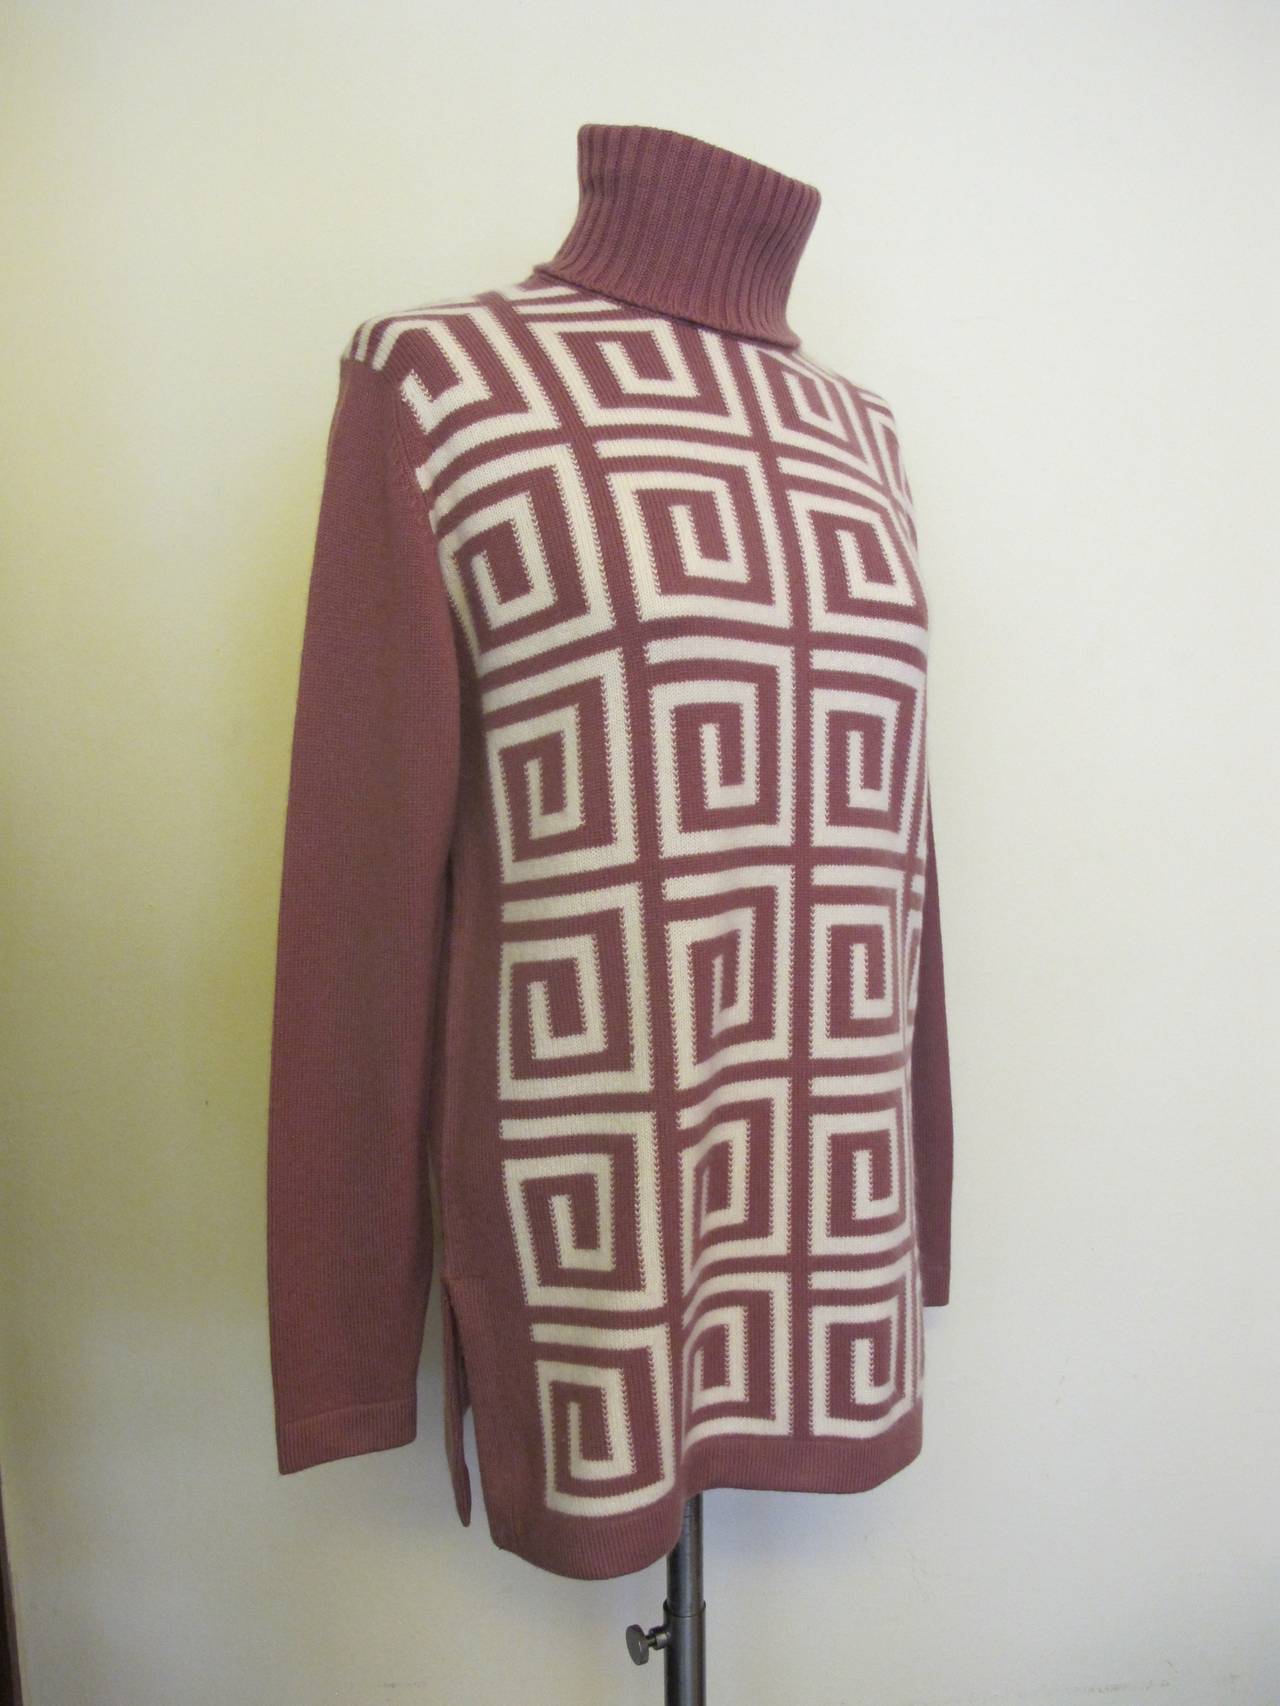 This Ballantyne Turtle Neck cashmere sweater was made expressly for I. Magnin in the 1960's. It is new without tags and the mauve color accentuated by the geometric spiral designs. Colors in sweater is Mauve and White. The Original
I. Magnin Tag is